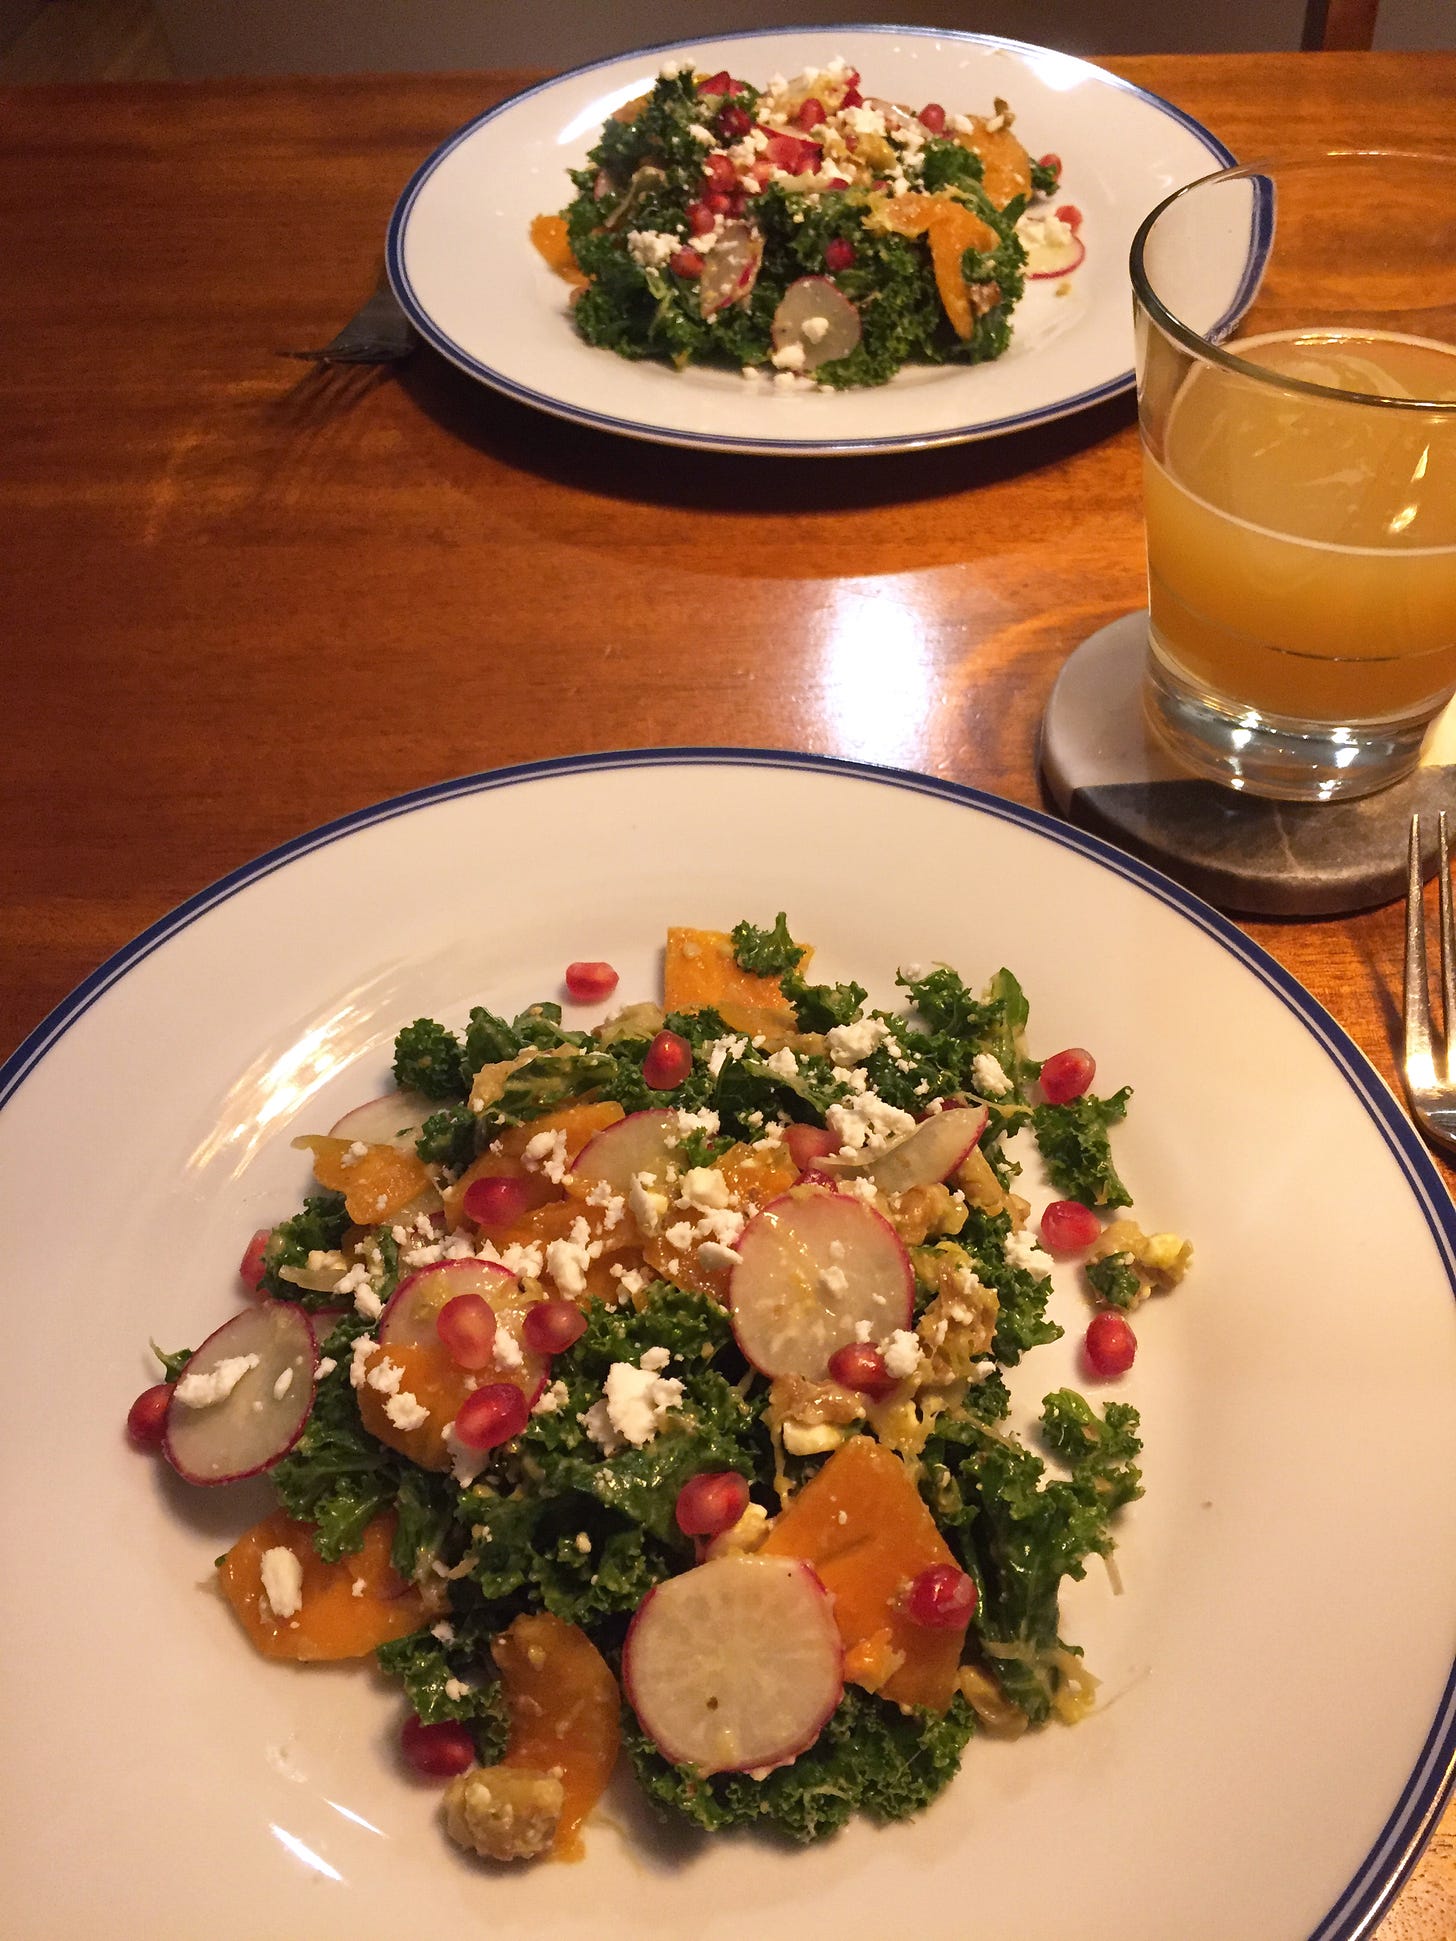 Across from each other are two white plates of kale salad, with orange slices of persimmon and thin radish rounds throughout. Feta is crumbled overtop, and pomegranate seeds are scattered over it.